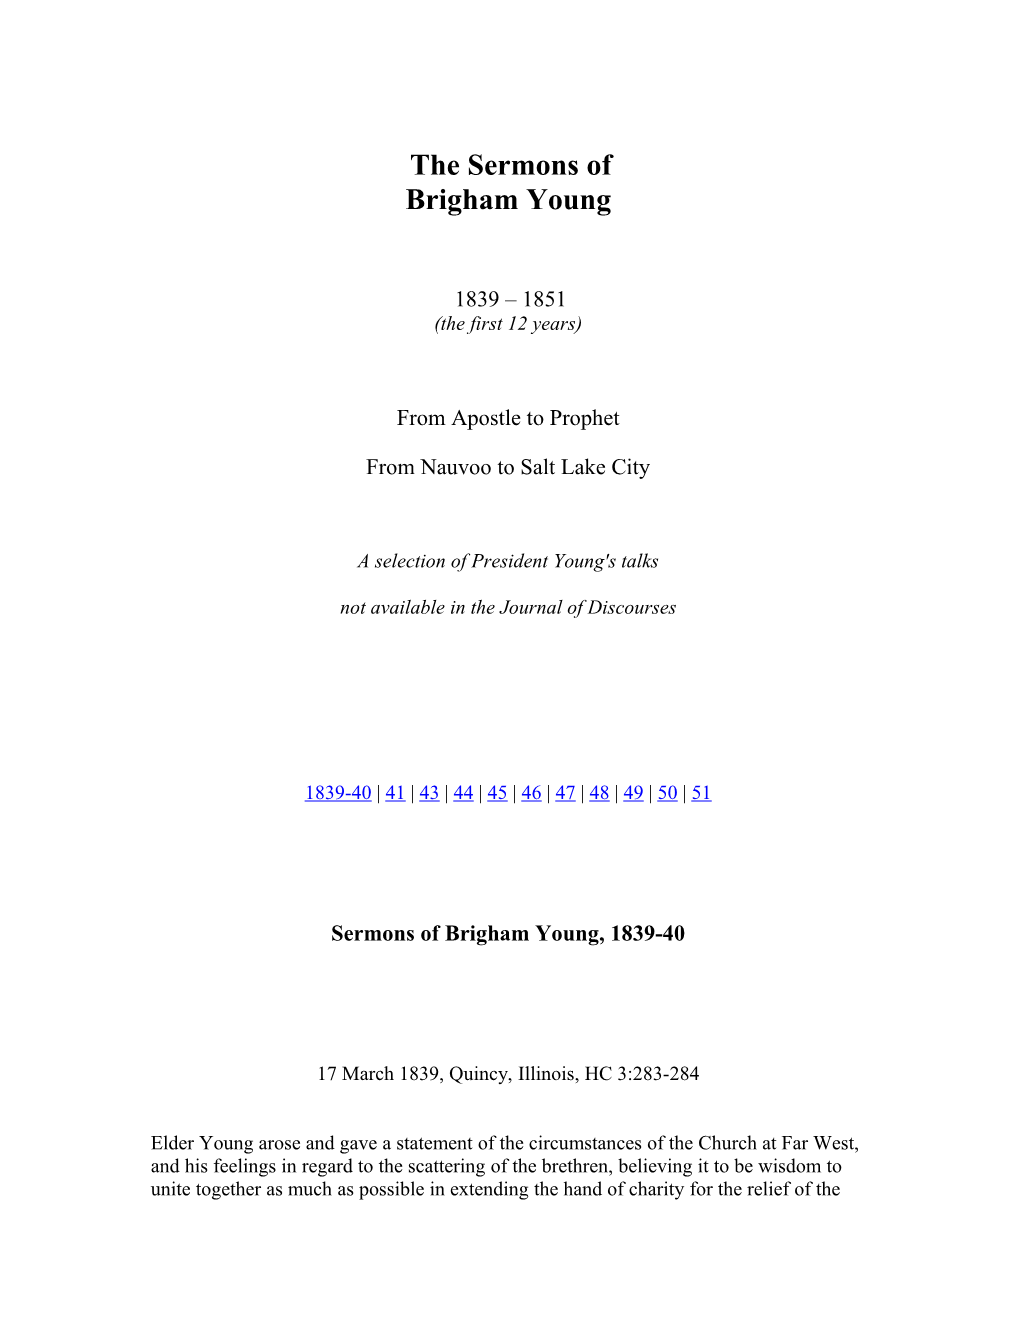 The Sermons of Brigham Young